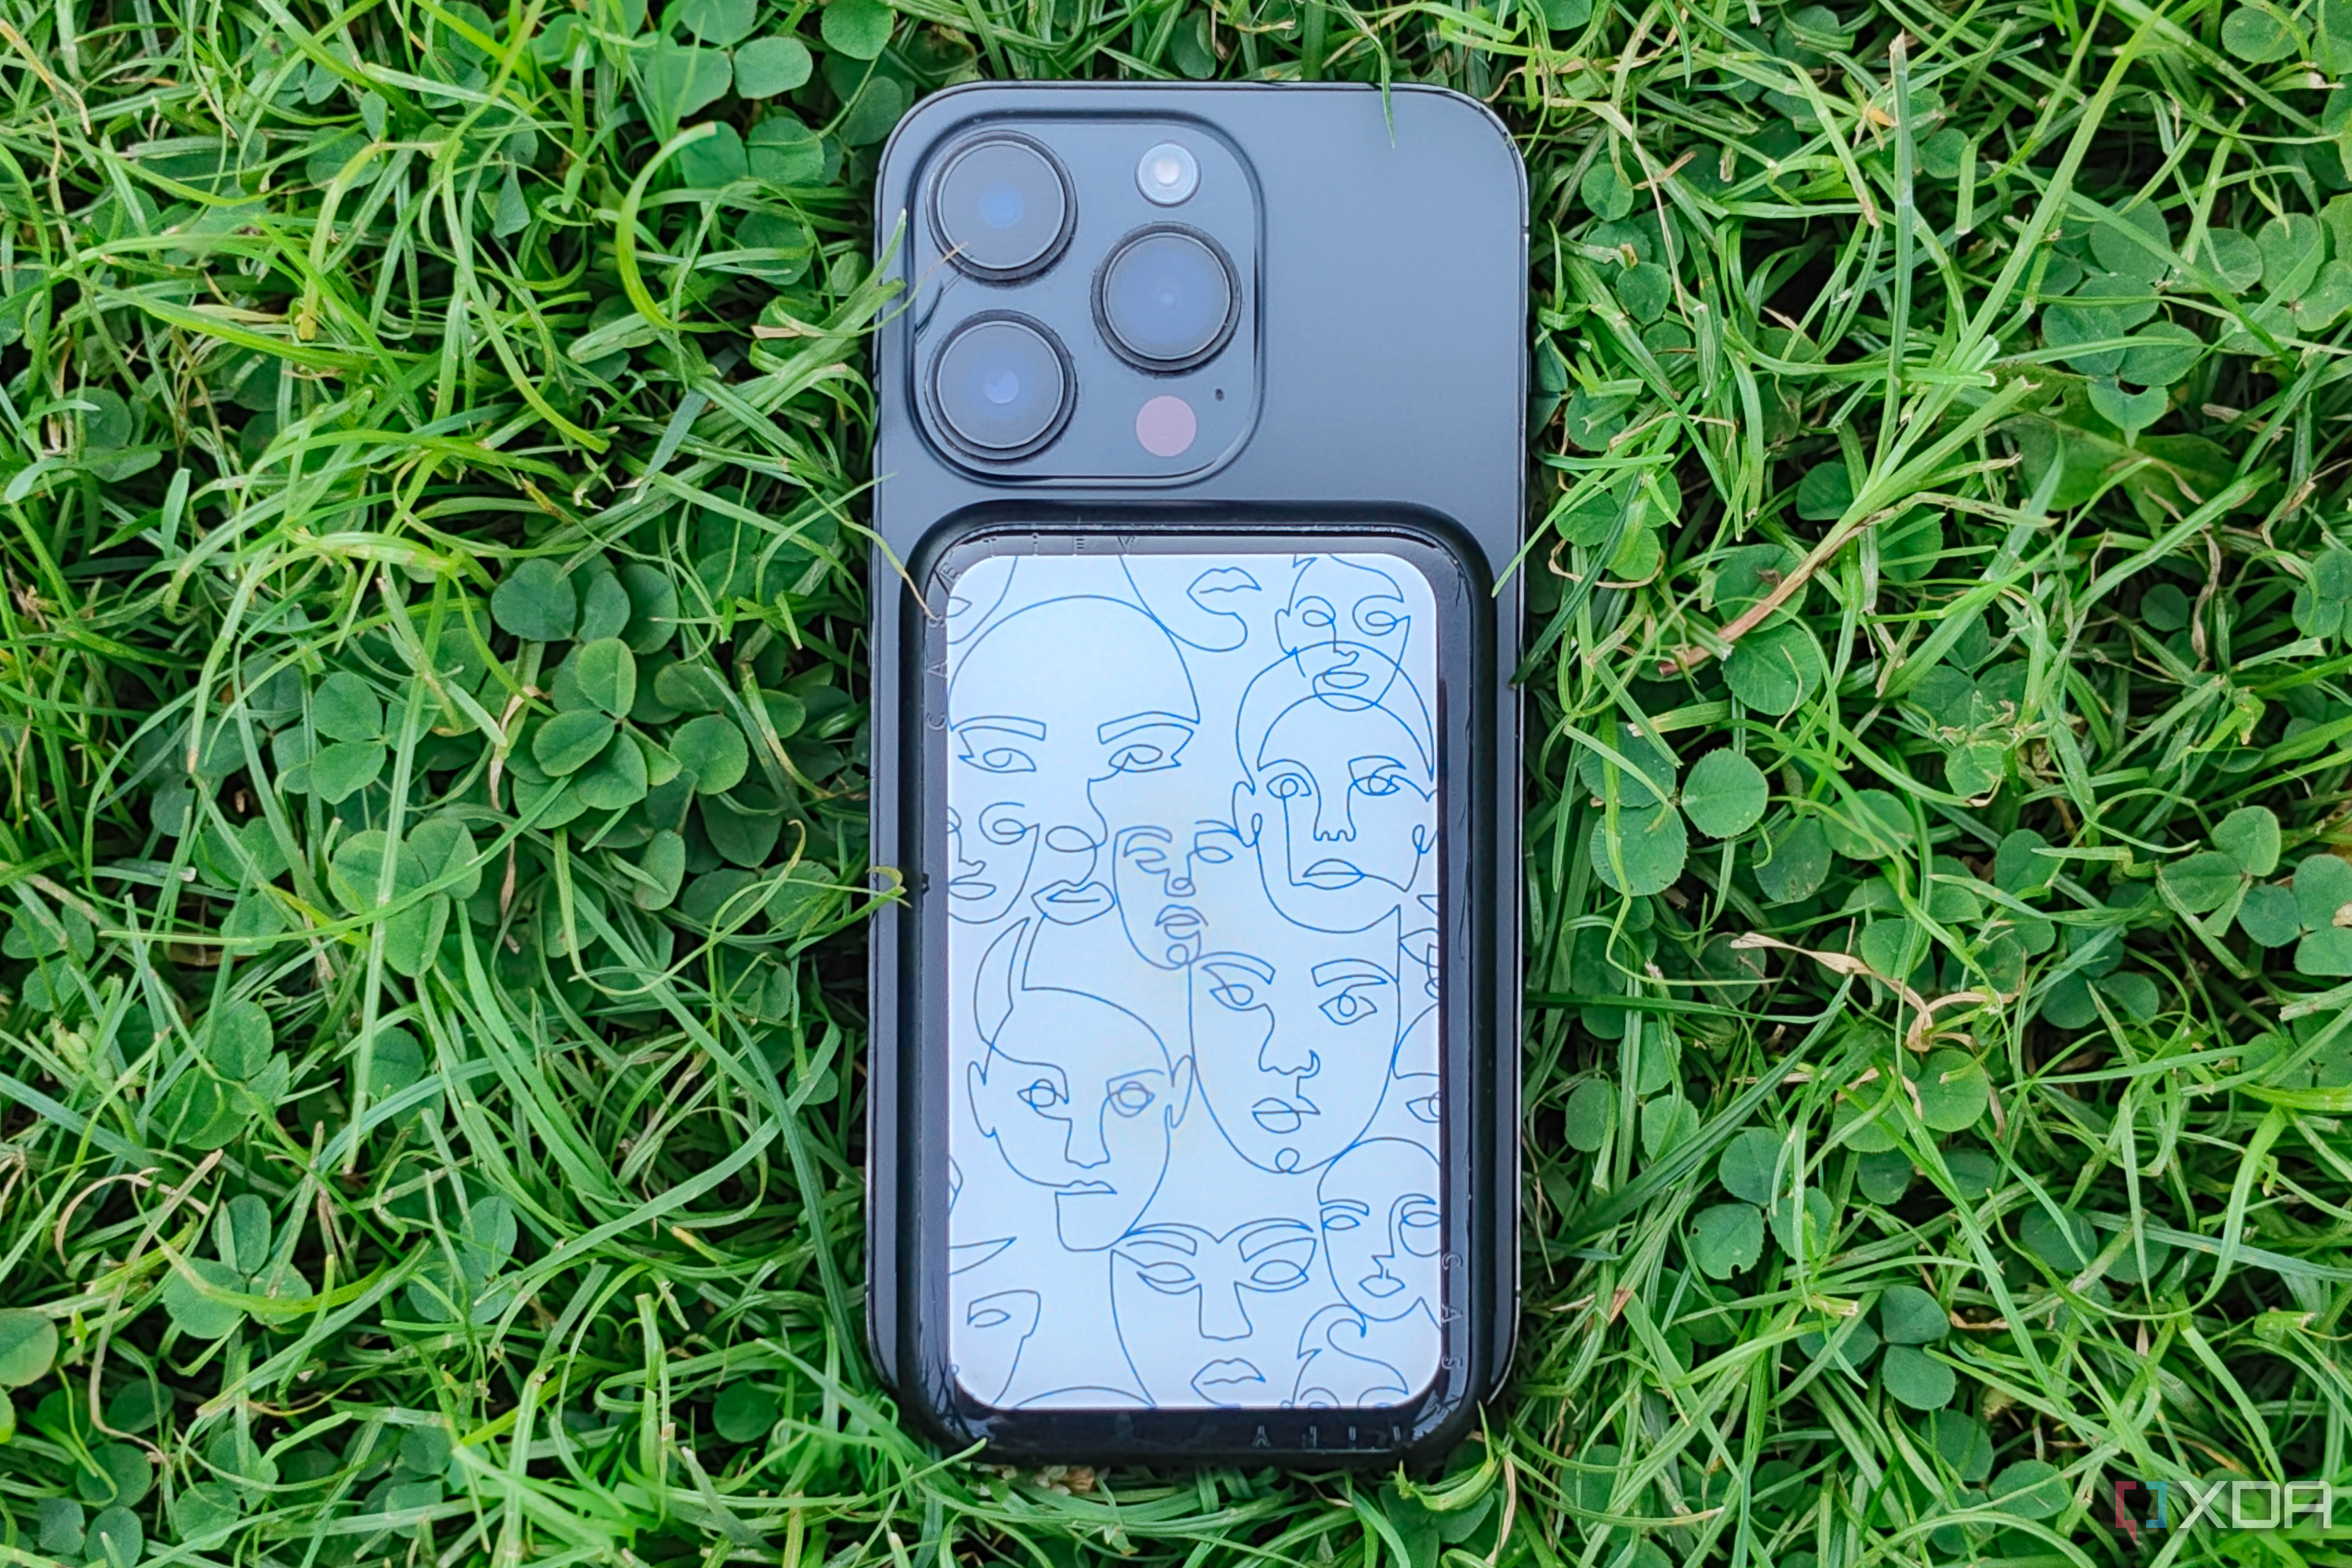 Casetify's PowerThru Power Bank connected to an iPhone 14 Pro on a grass background.